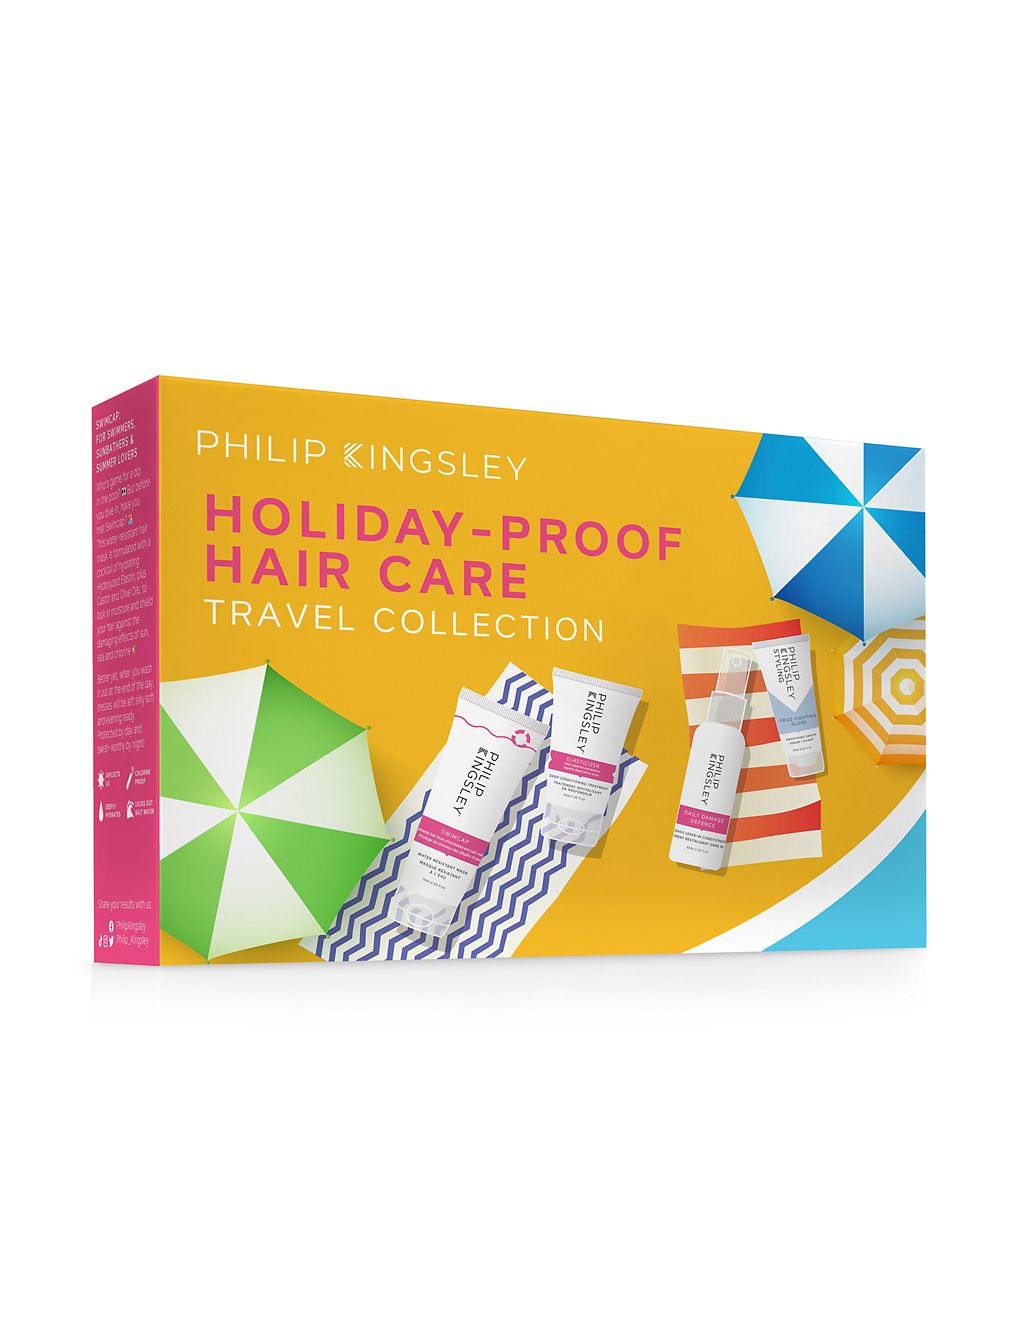 Holiday-Proof Hair Care Travel Collection 1 of 3